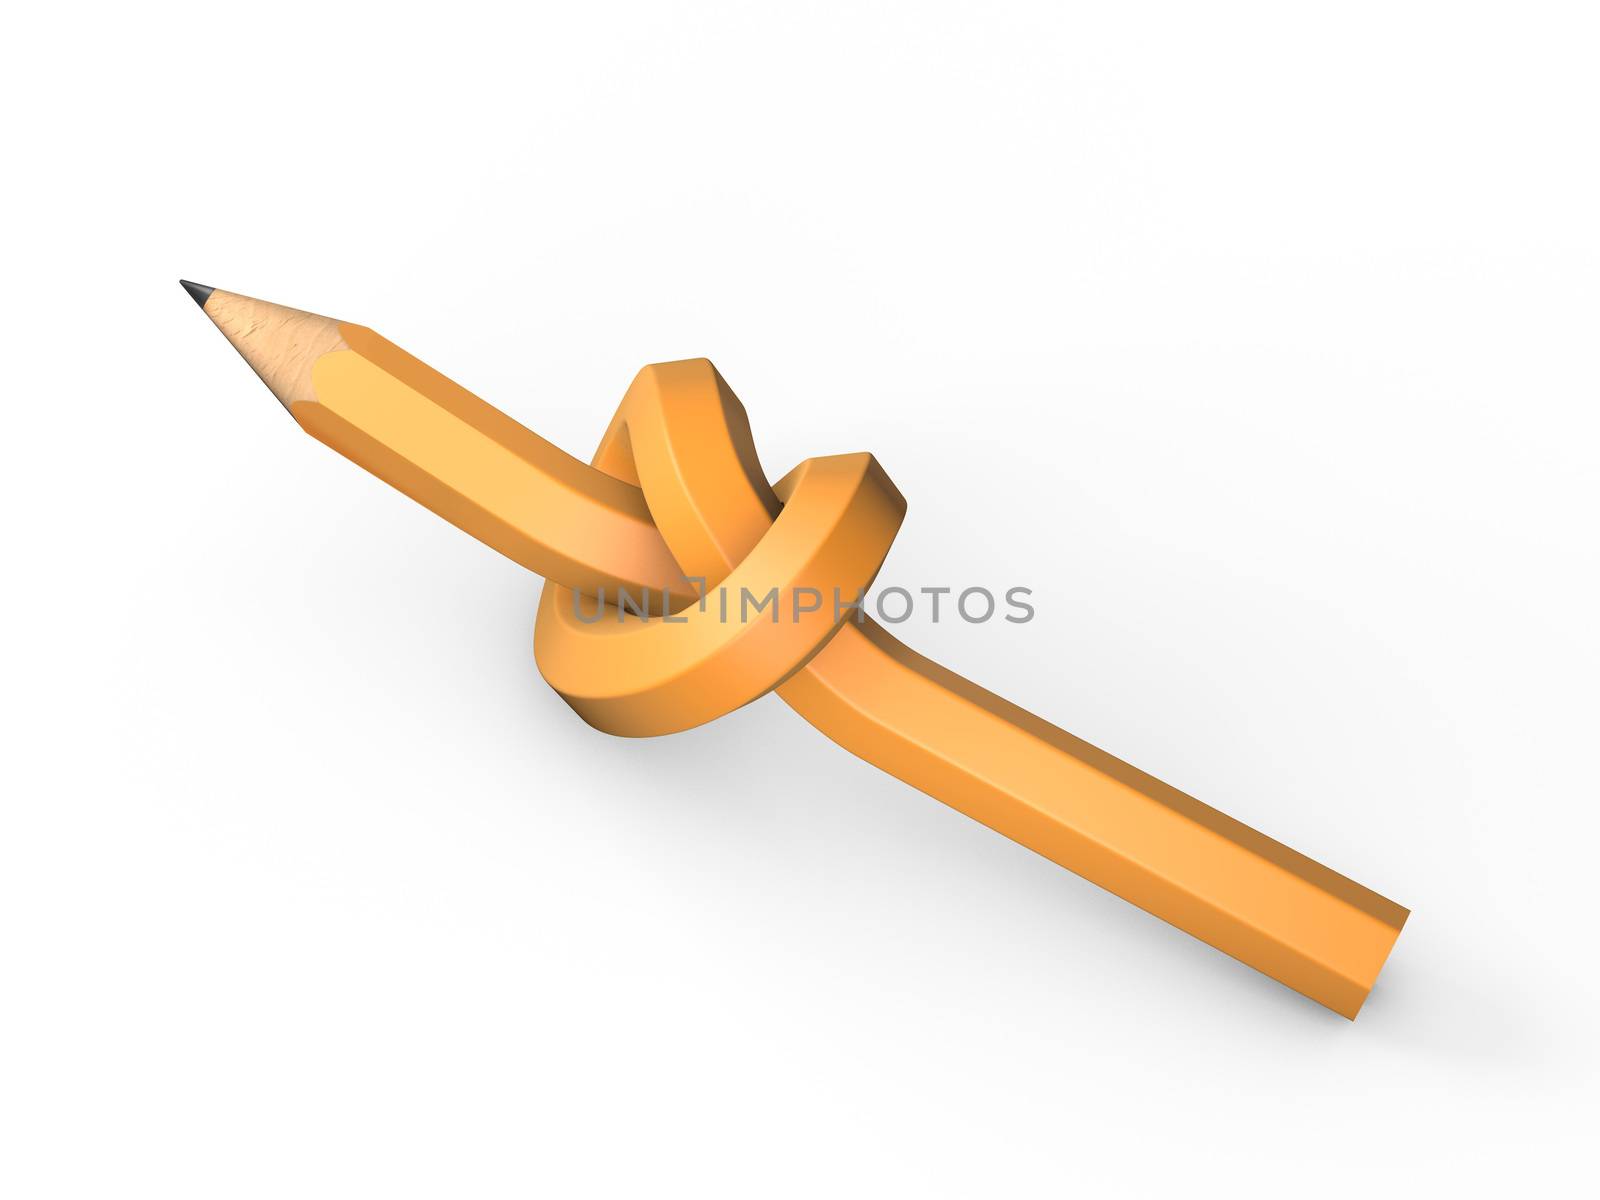 Orange pencil tied in a knot on a white background